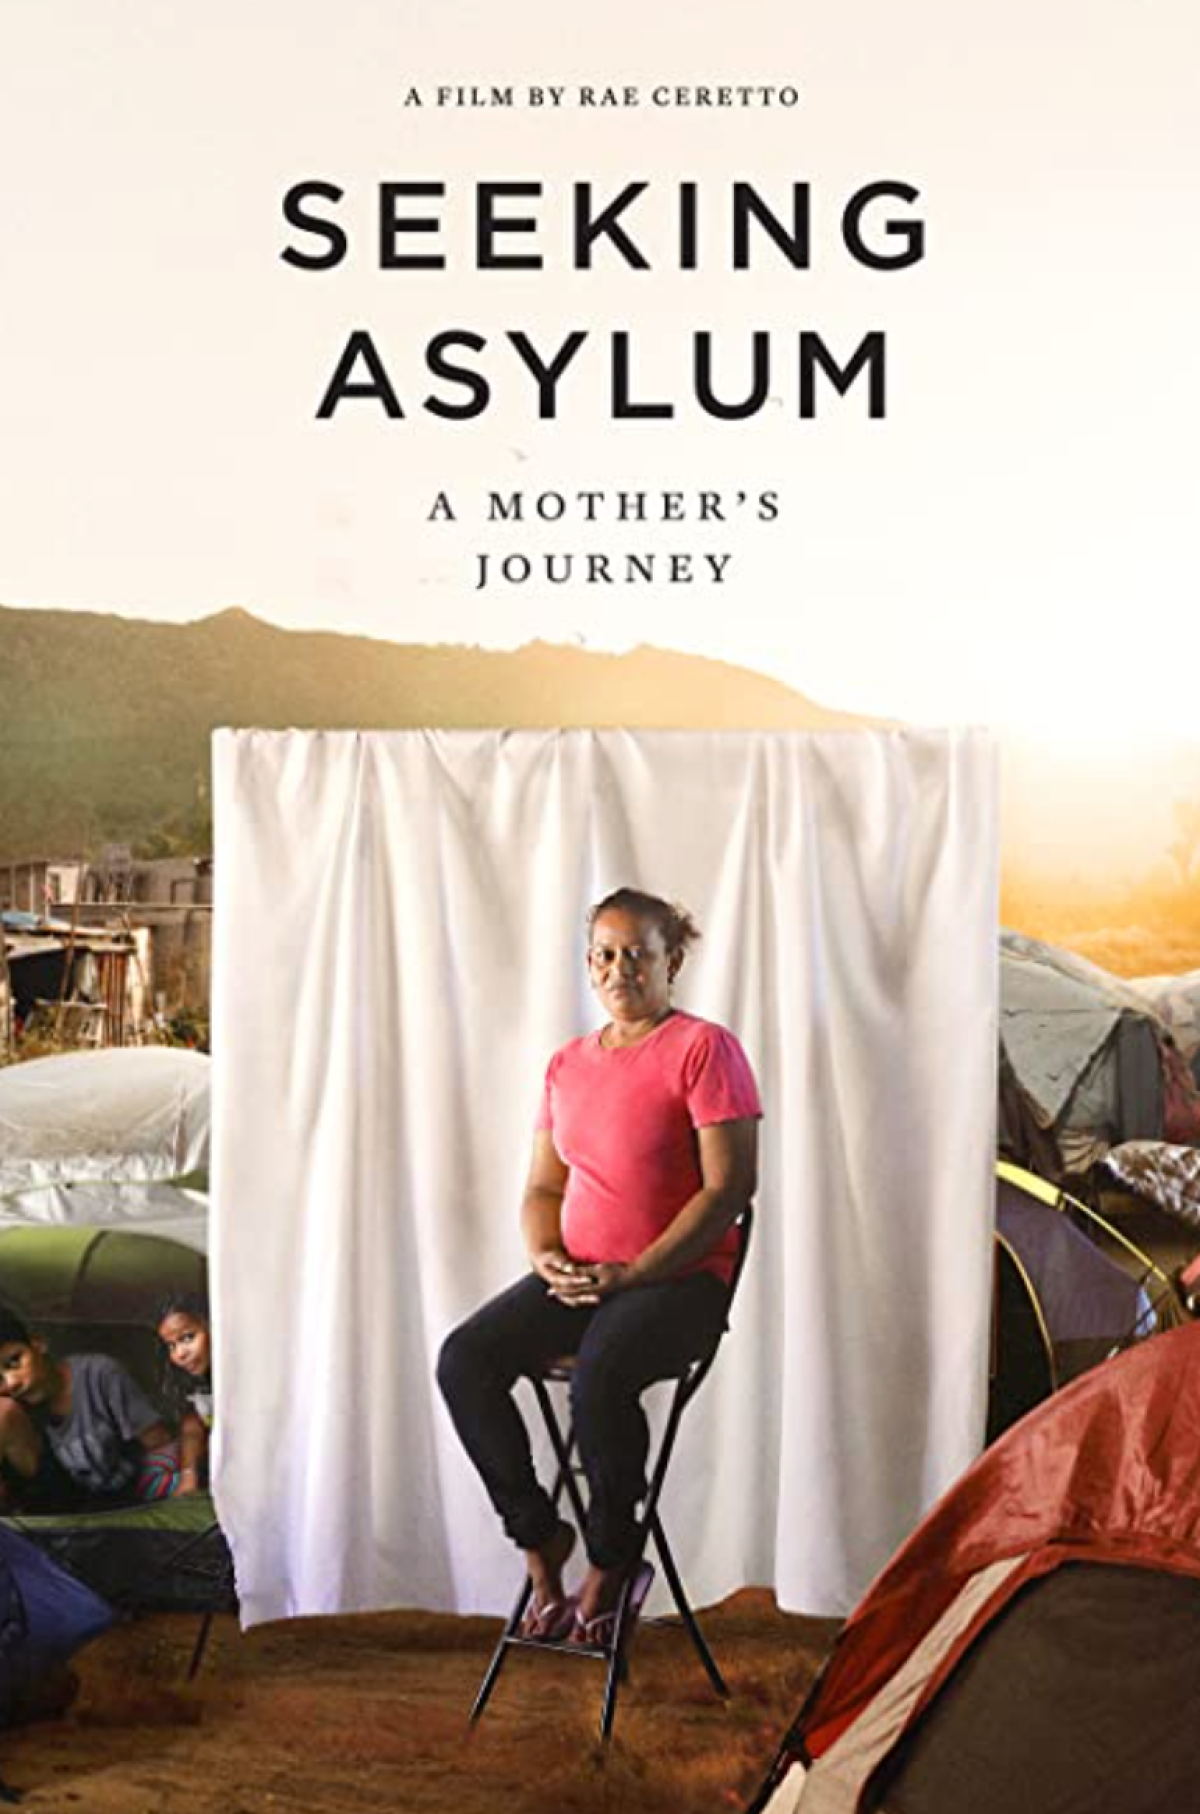 A movie poster for the documentary "Seeking Asylum: A Mother's Journey."